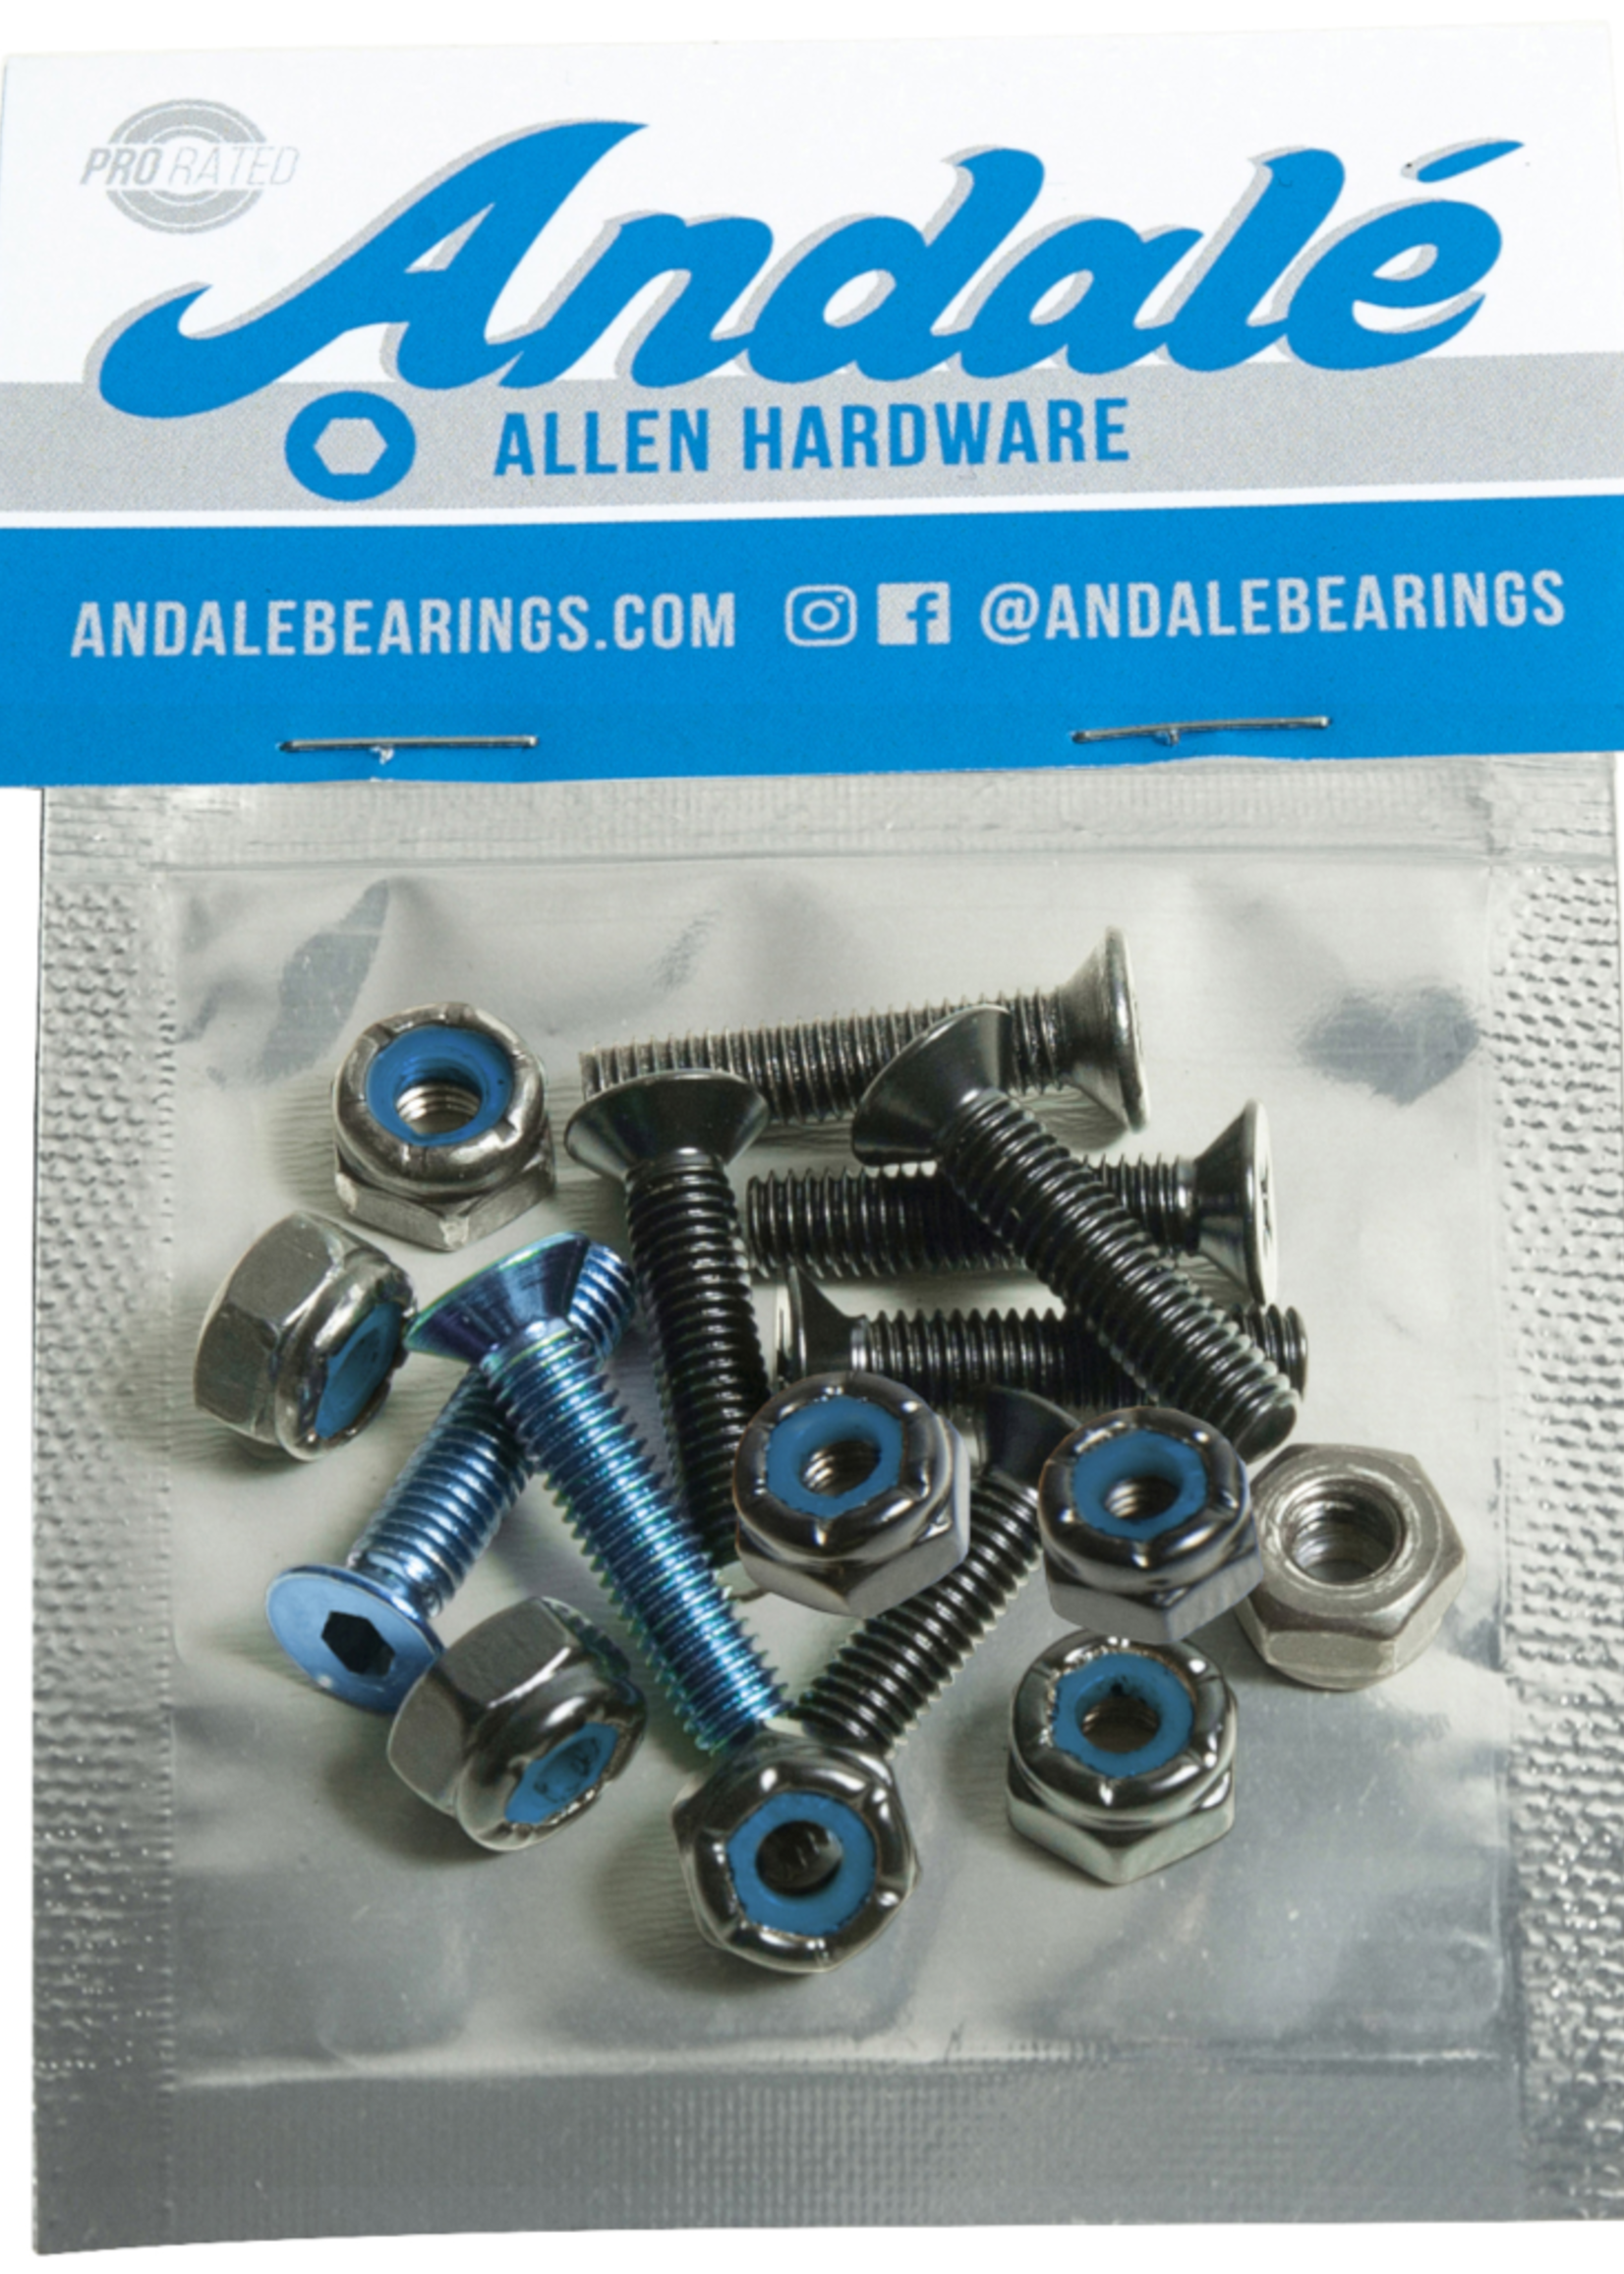 ANDALE BEARINGS ANDALE 7/8" BLUE ALLEN HARDWARE